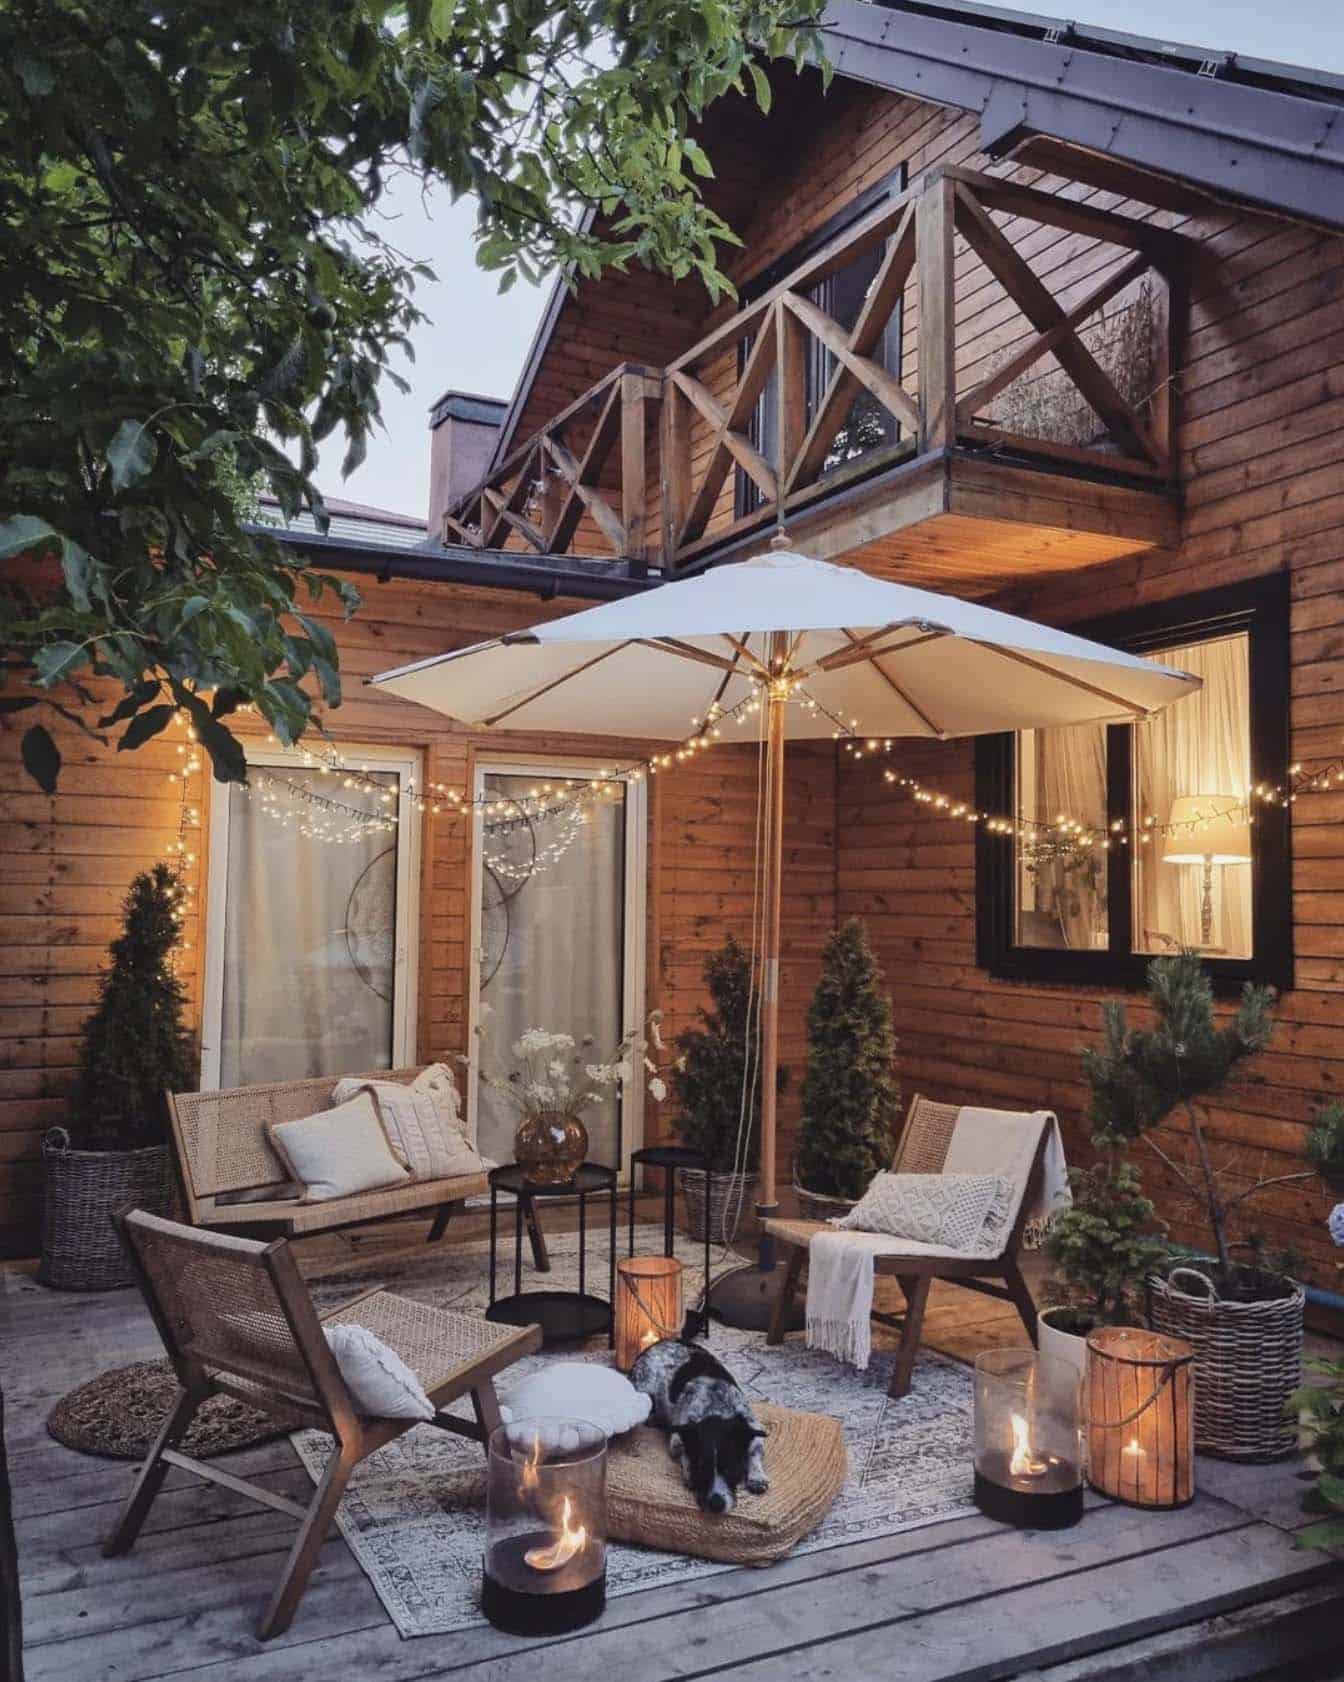 boho style patio with an umbrella and string lights